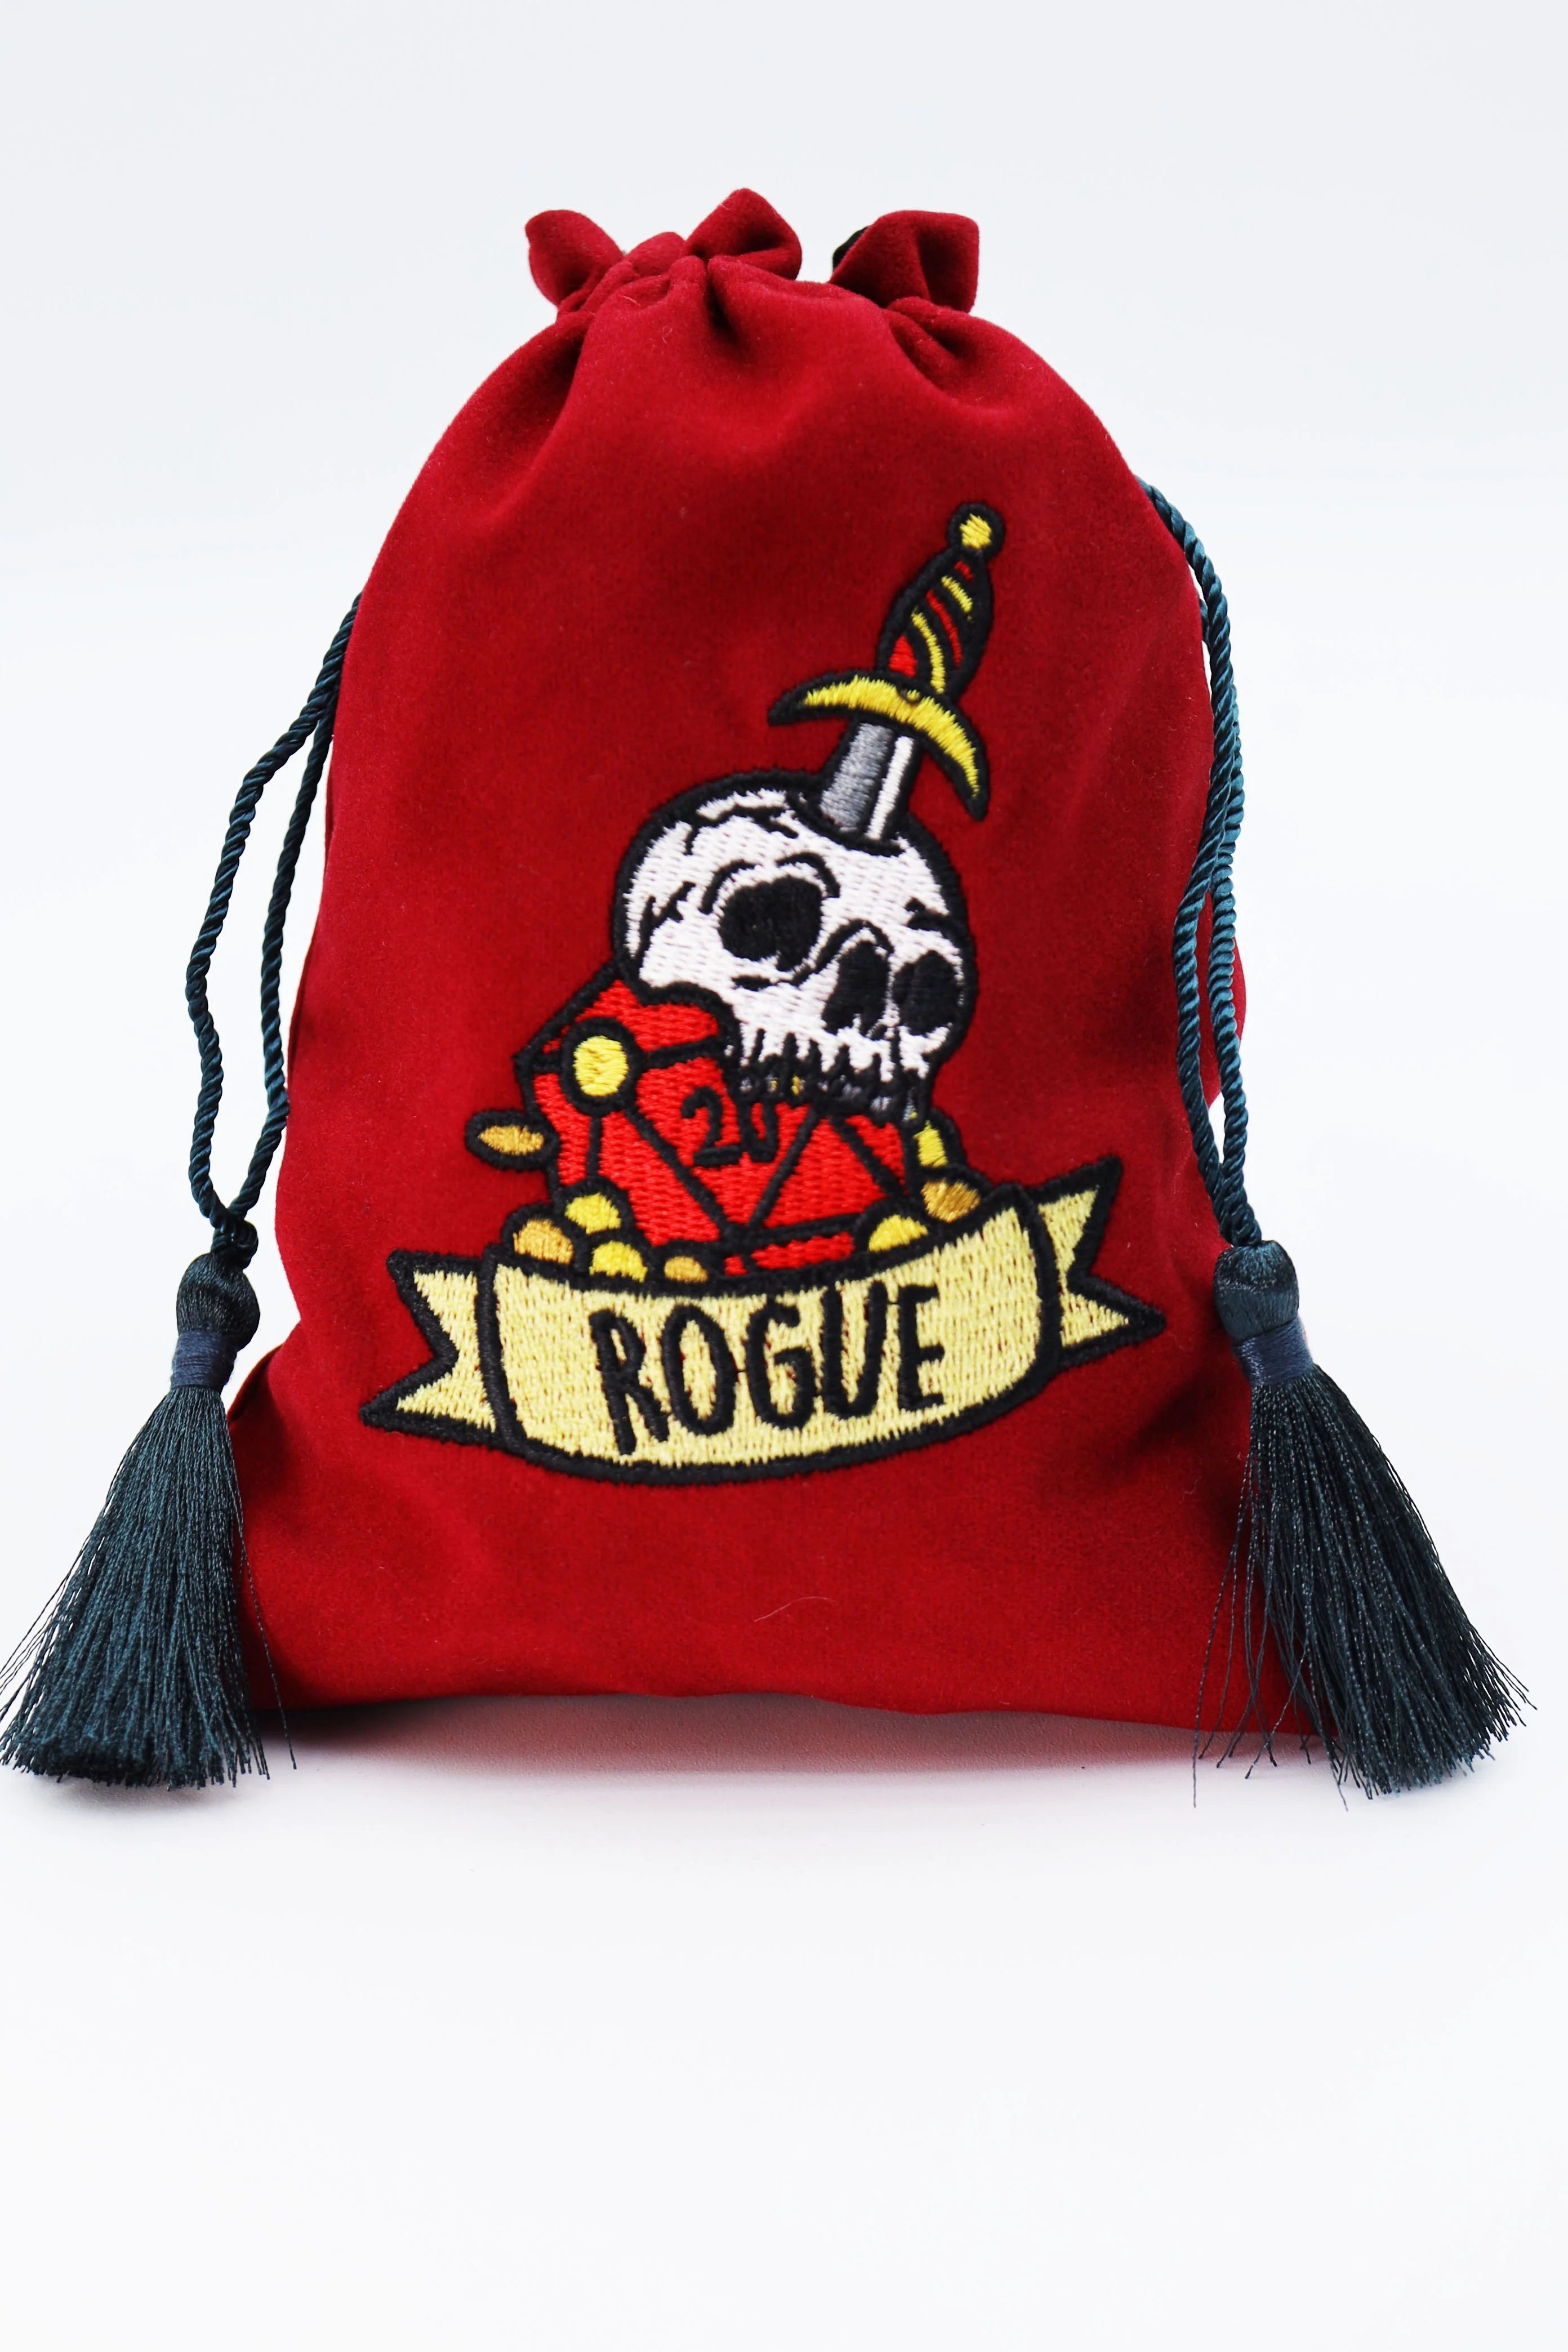 DICE BAG - ROGUE Dice & Counters Foam Brain Games    | Red Claw Gaming